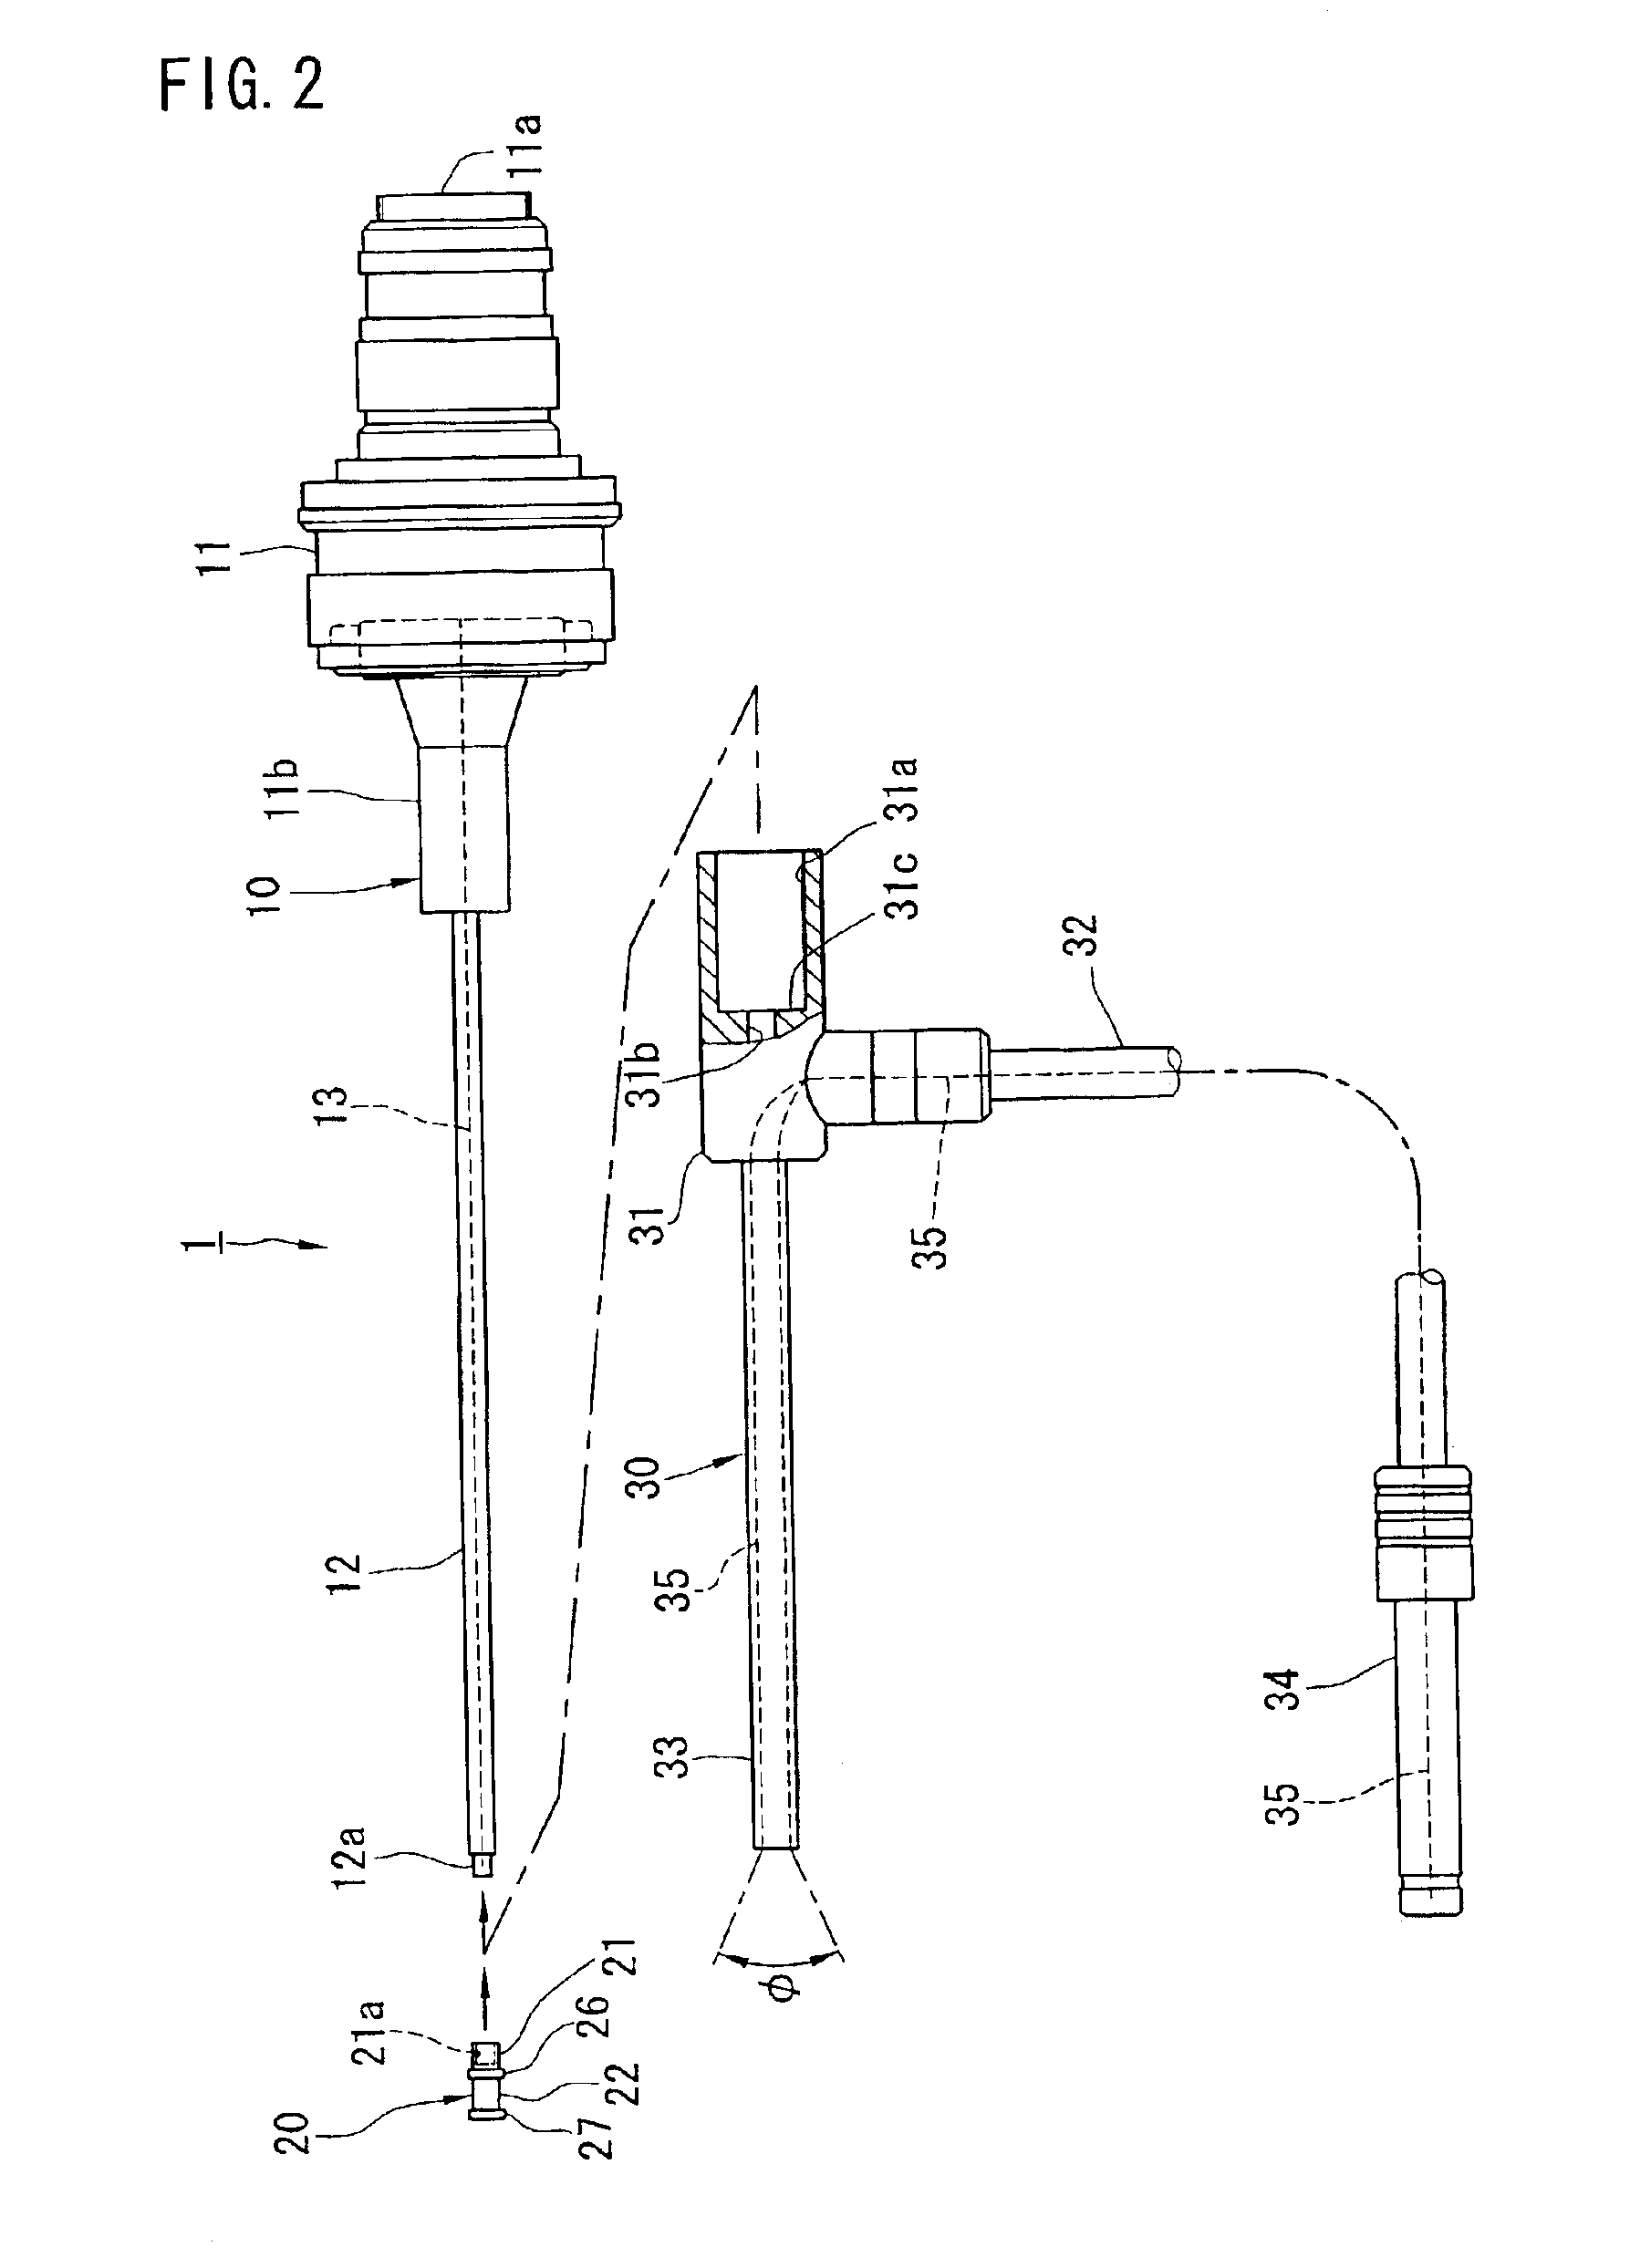 Endoscope apparatus with an omnidirectional view field and a translatable illuminator